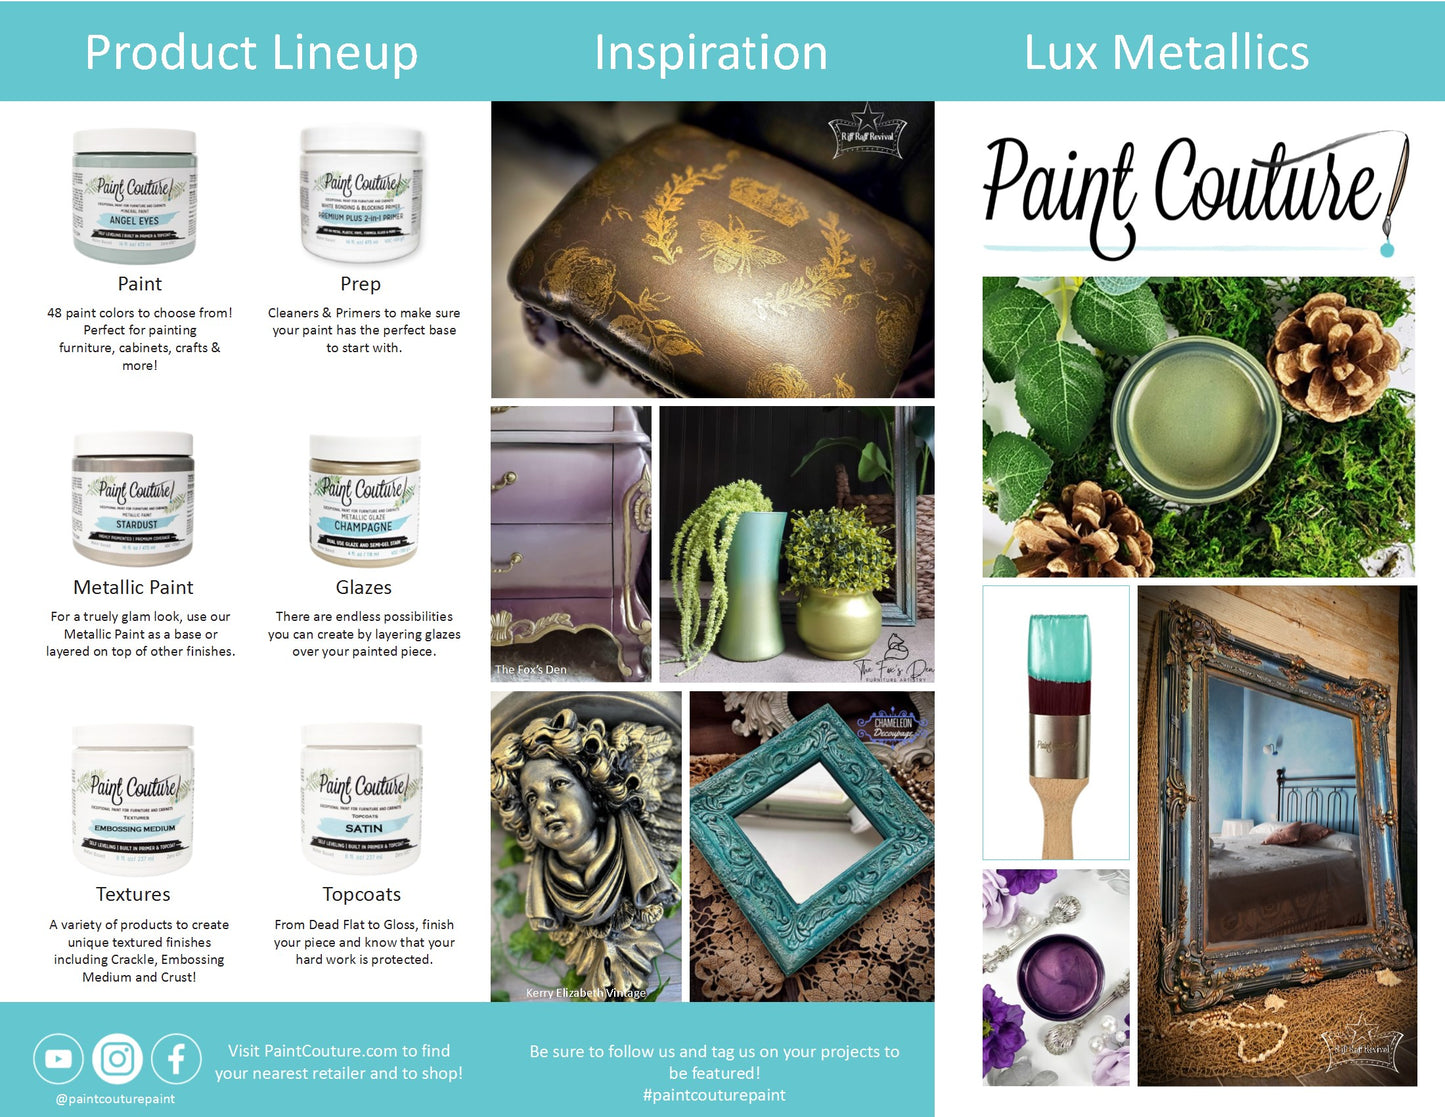 Silver Ice Paint Couture Lux Metallic Paint